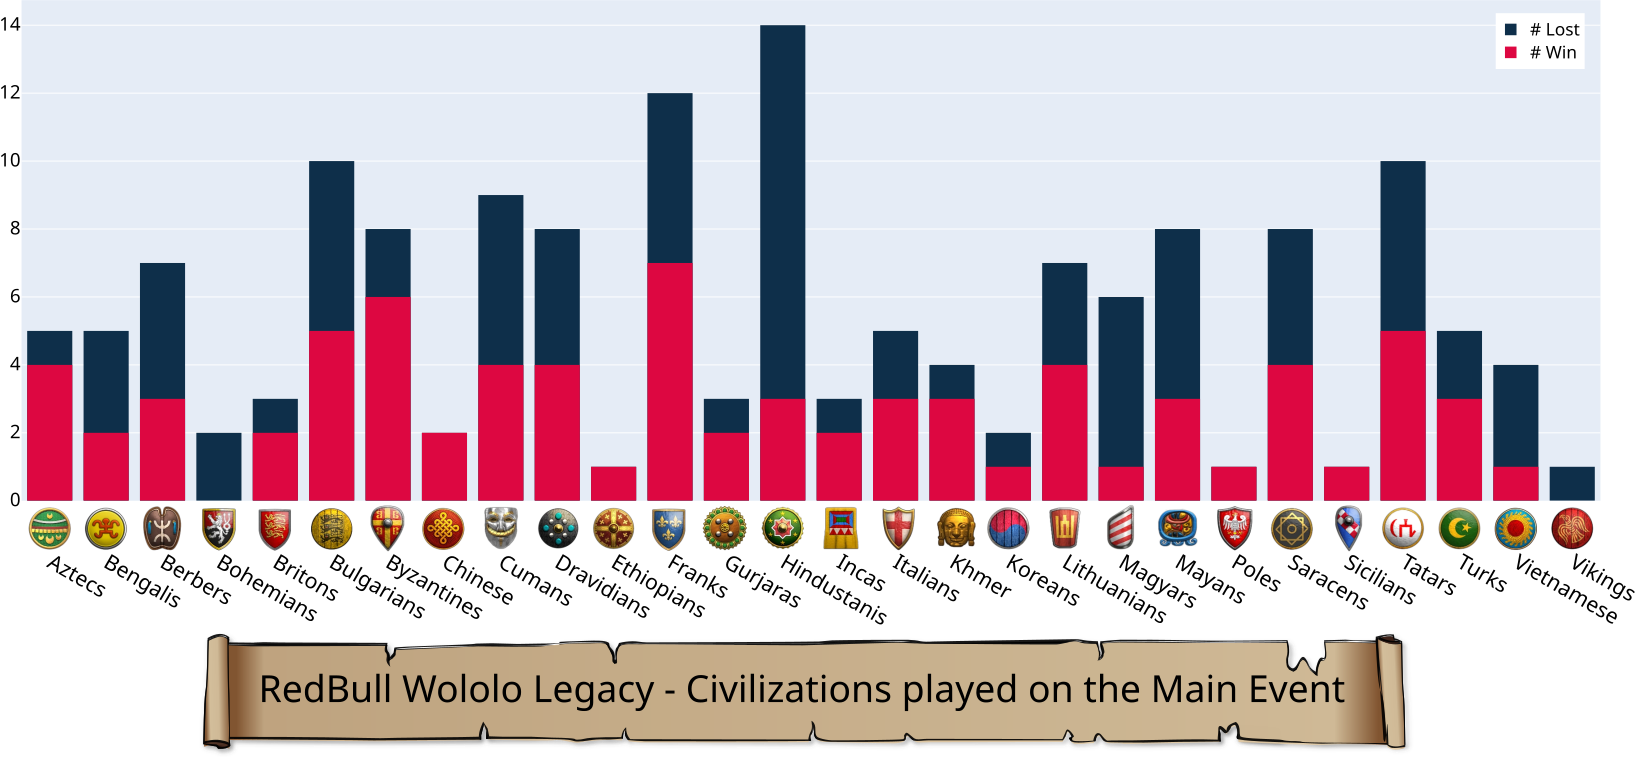 Kill/death ratio of each played civs